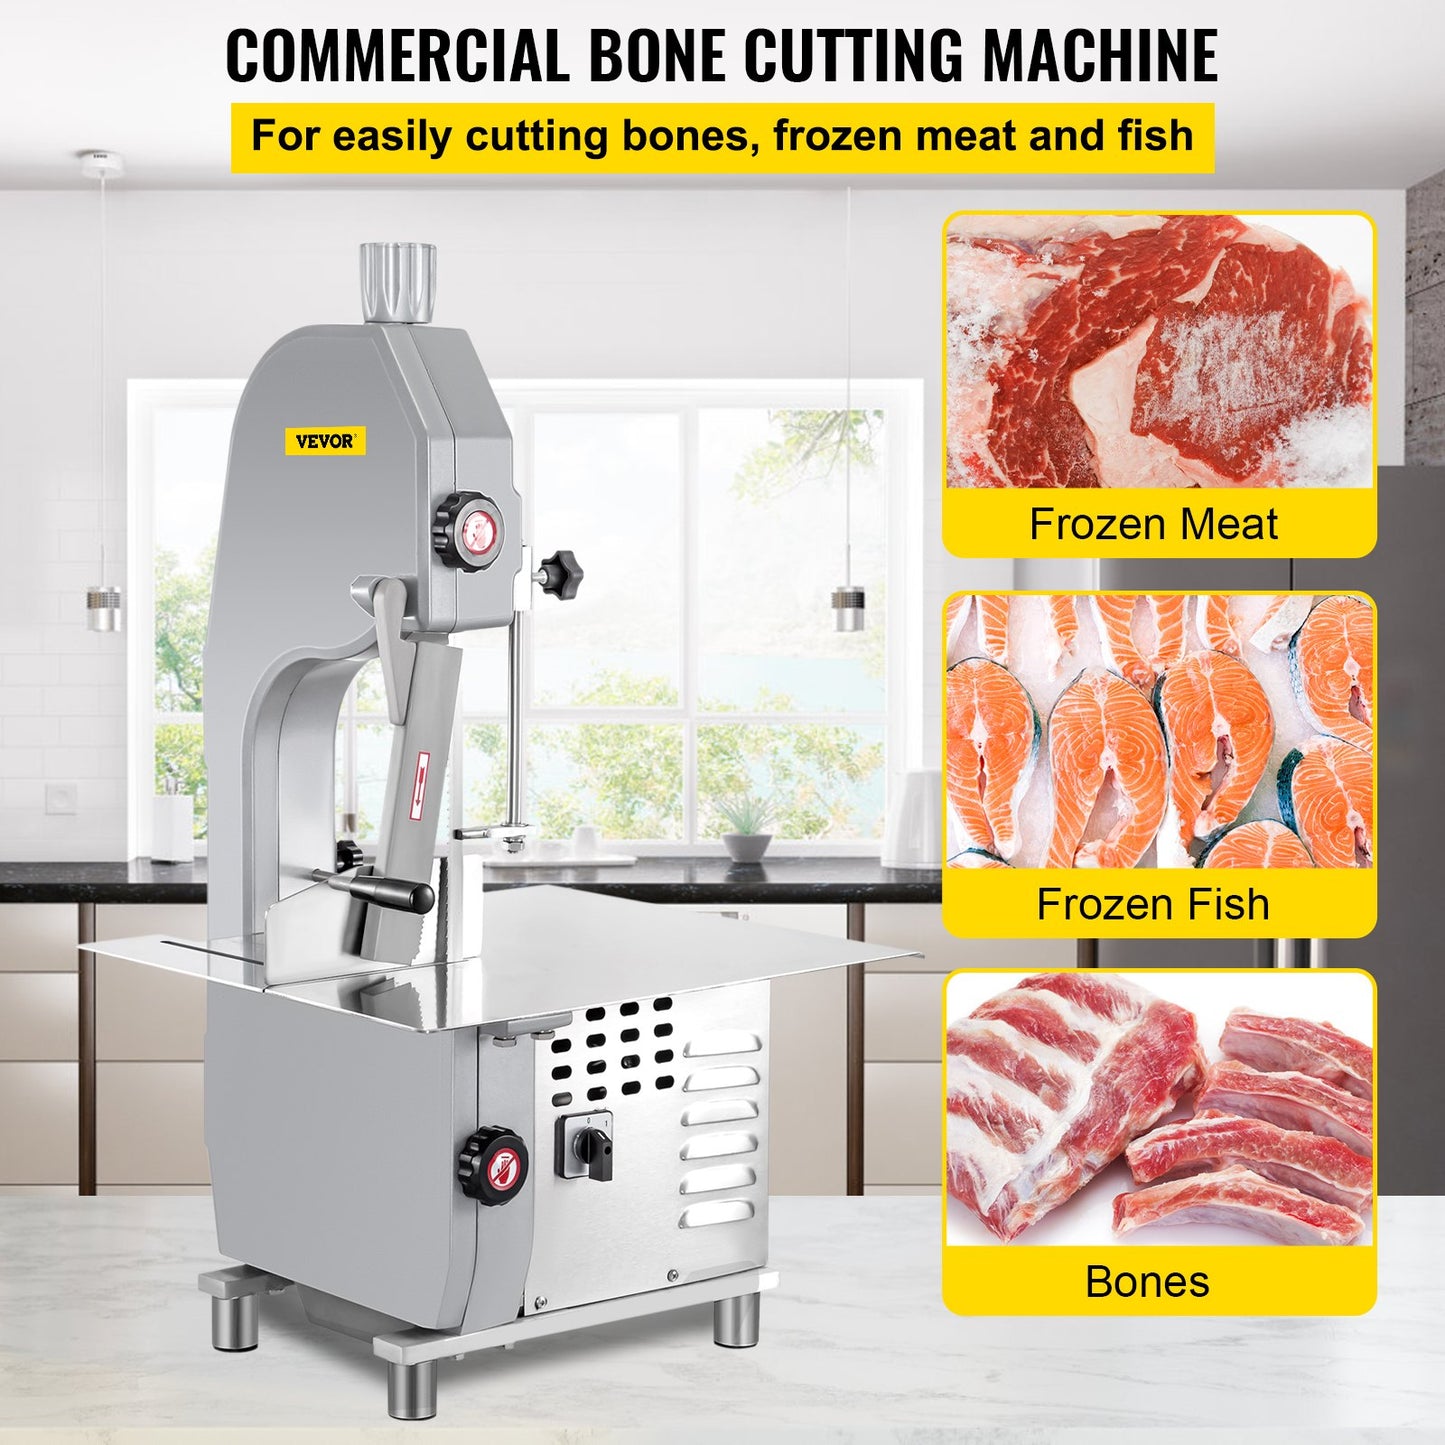 Commercial Bone Cutting Machine 19.3x17.3-Inch Workbench, Bone Saw Machine 0.2-7.1 Inch Cutting Thickness Adjustable, Band Saw Meat Cutter 1500 W, Meat Bandsaw Tabletop, Meat Cutting Bandsaw